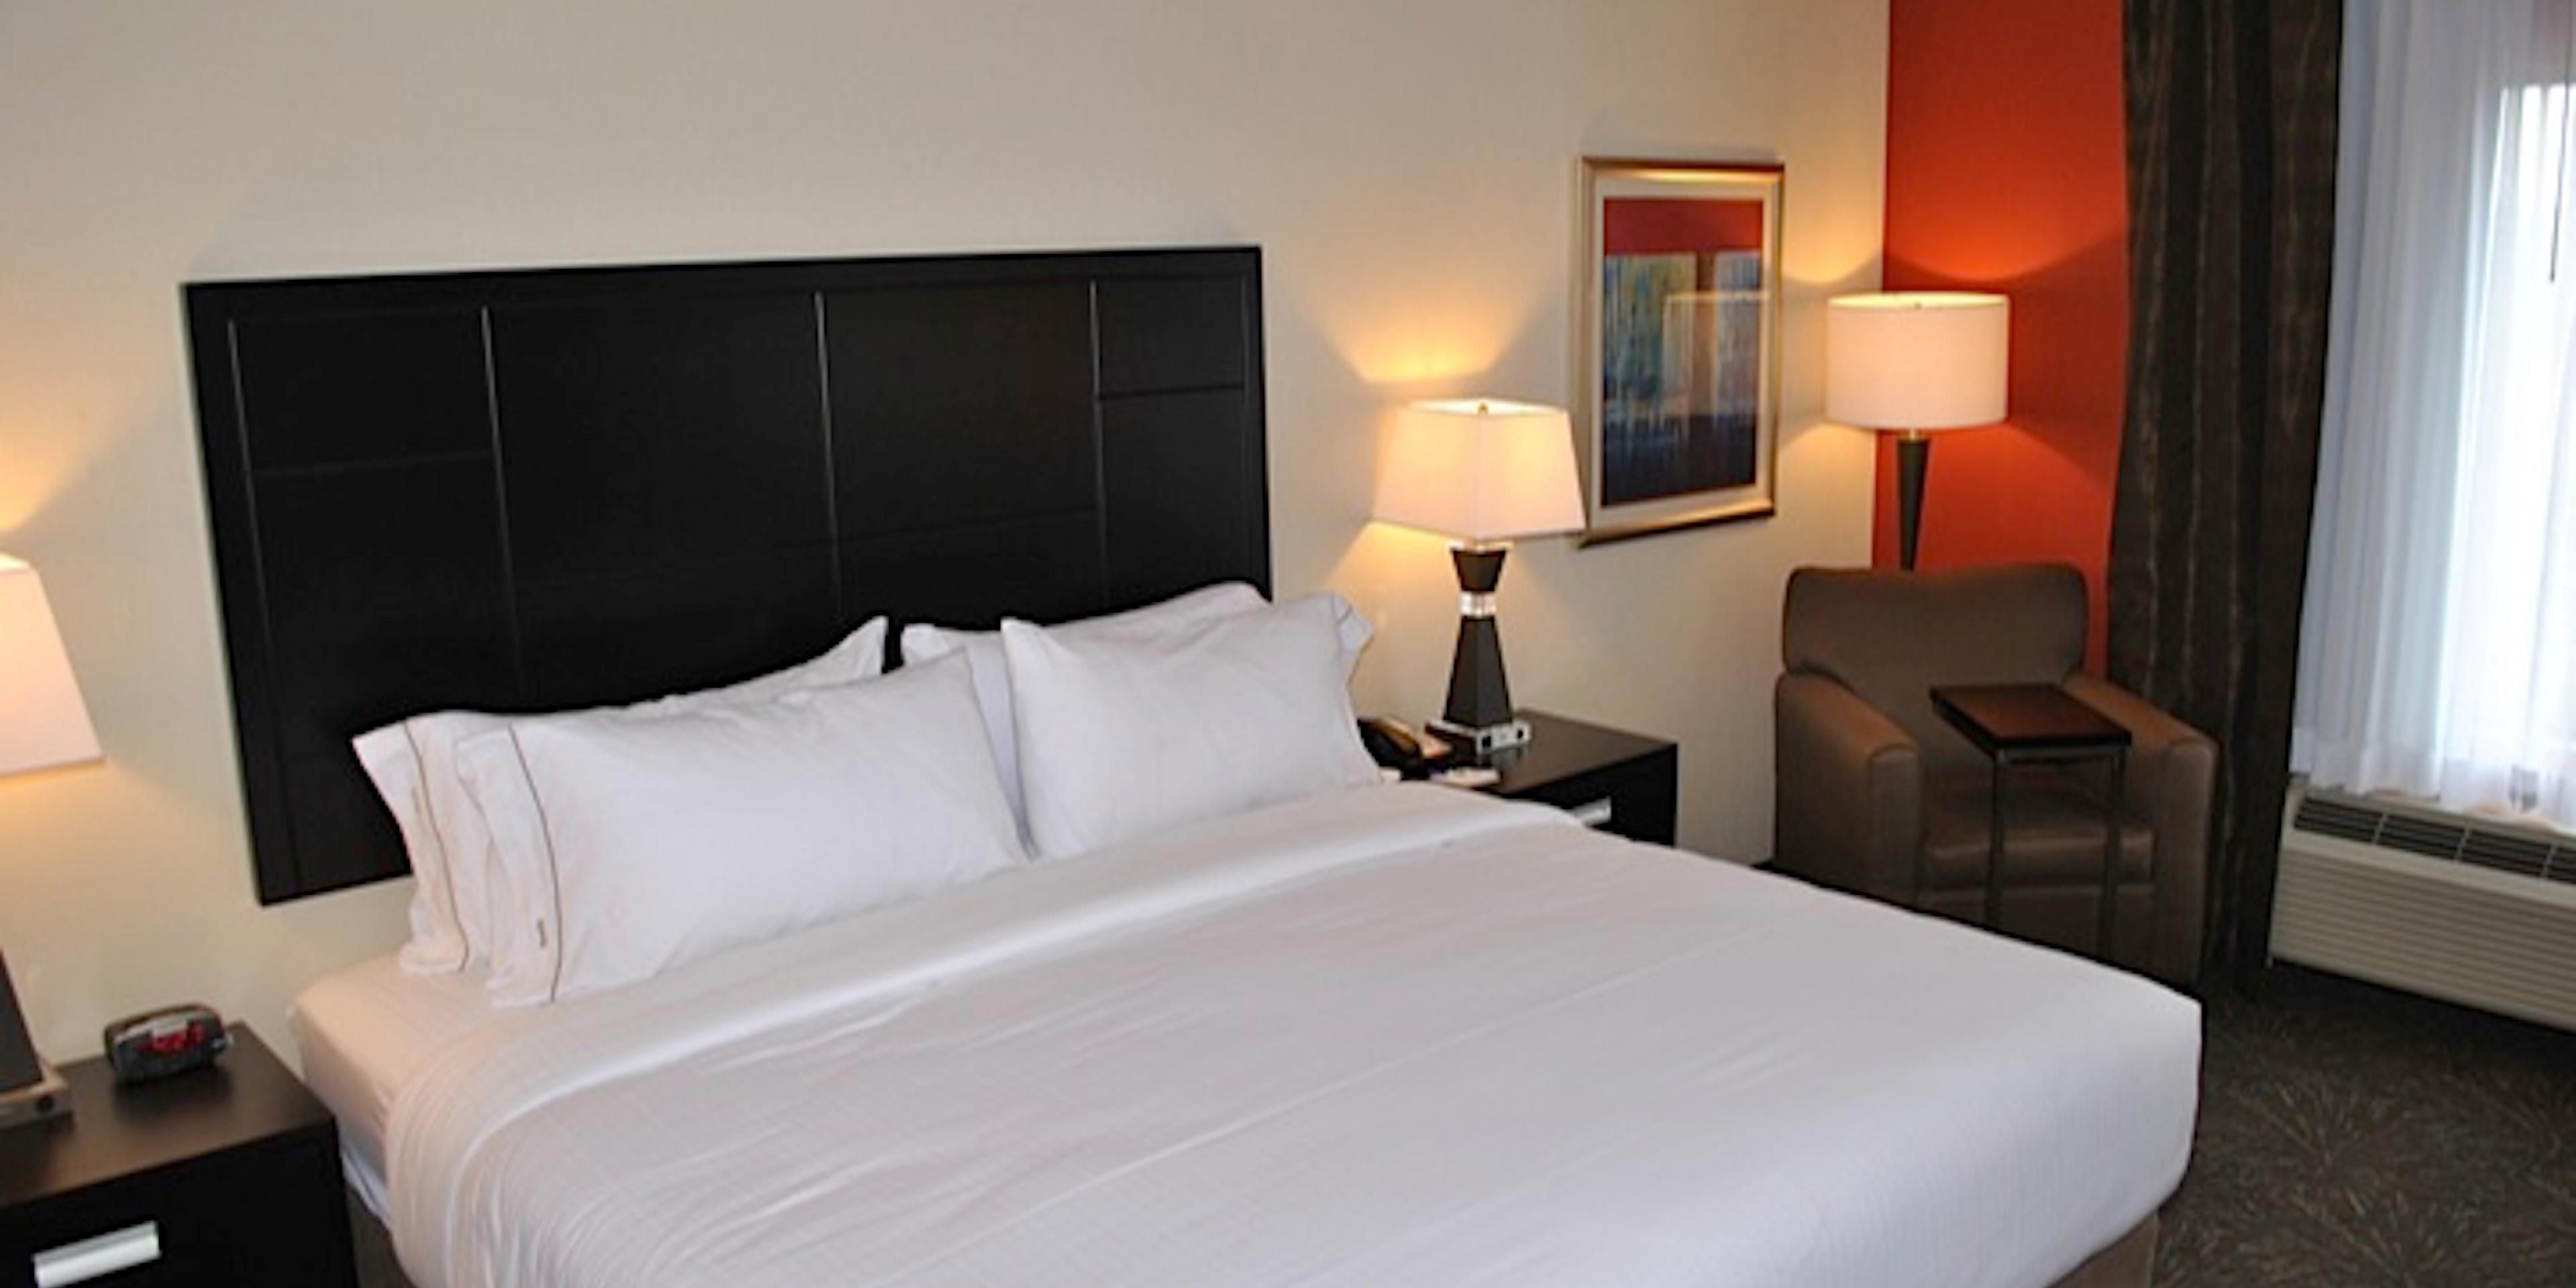 Enjoy a relaxing and refreshing stay in our new and modern sleeping rooms! All rooms feature a Keurig, microwave, & refrigerator. Kick back with many channel options on the 49" LED TV. Get some work done on the spacious work desk or relax in the comfortable bedside chair. Stay connected with complimentary WiFi and USB charging options in the room.